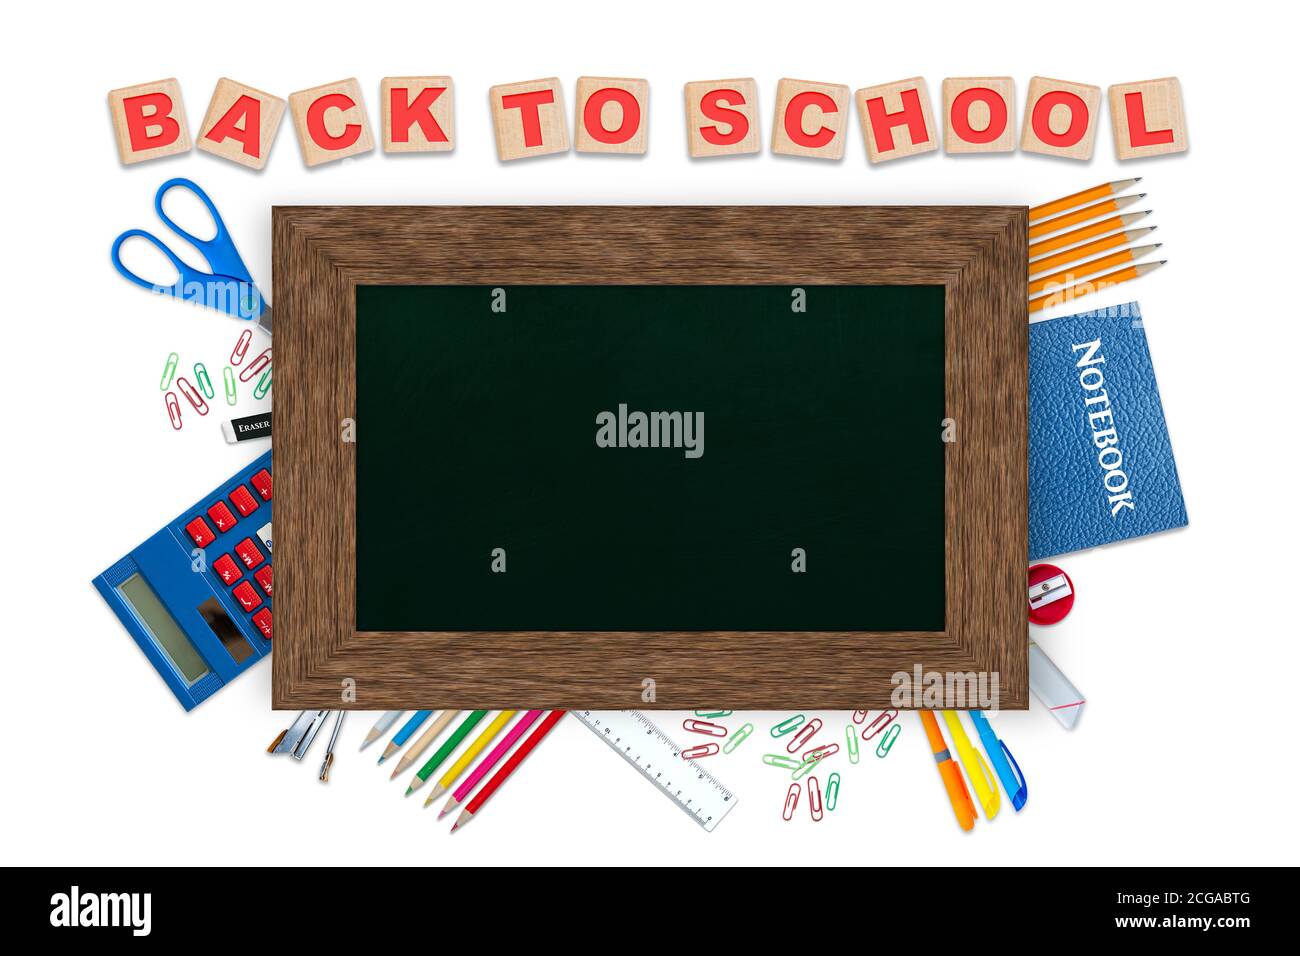 Back to school alphabet blocks, concept of education with stationery and chalkboard copy space on top isolated on white background. Stock Photo